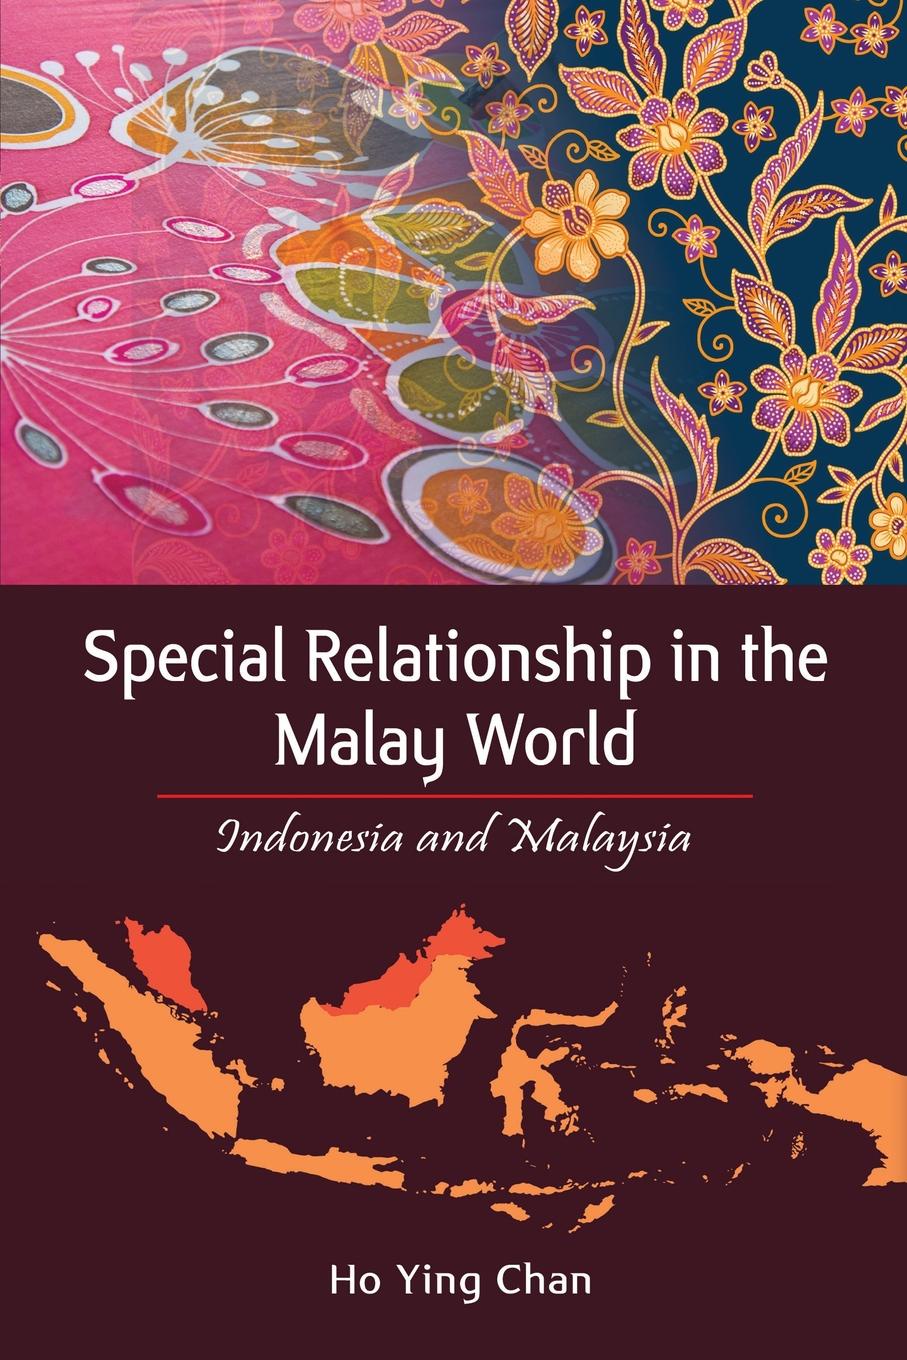 Special Relationship in the Malay World. Indonesia and Malaysia